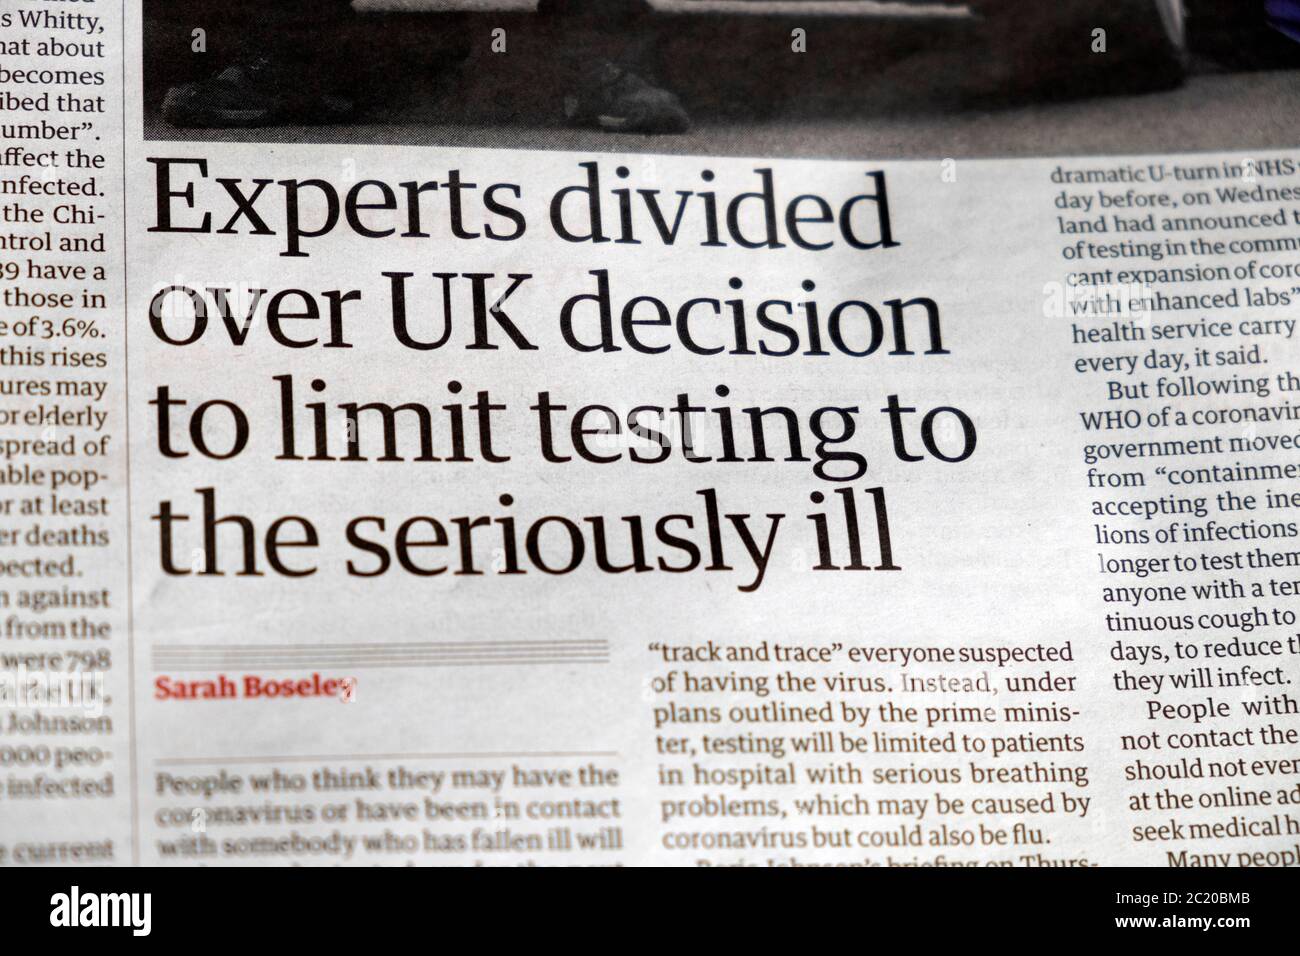 'Experts divided over UK decision to limit testing to the seriously ill'. Guardian newspaper test and trace headline London England UK Great Britain Stock Photo